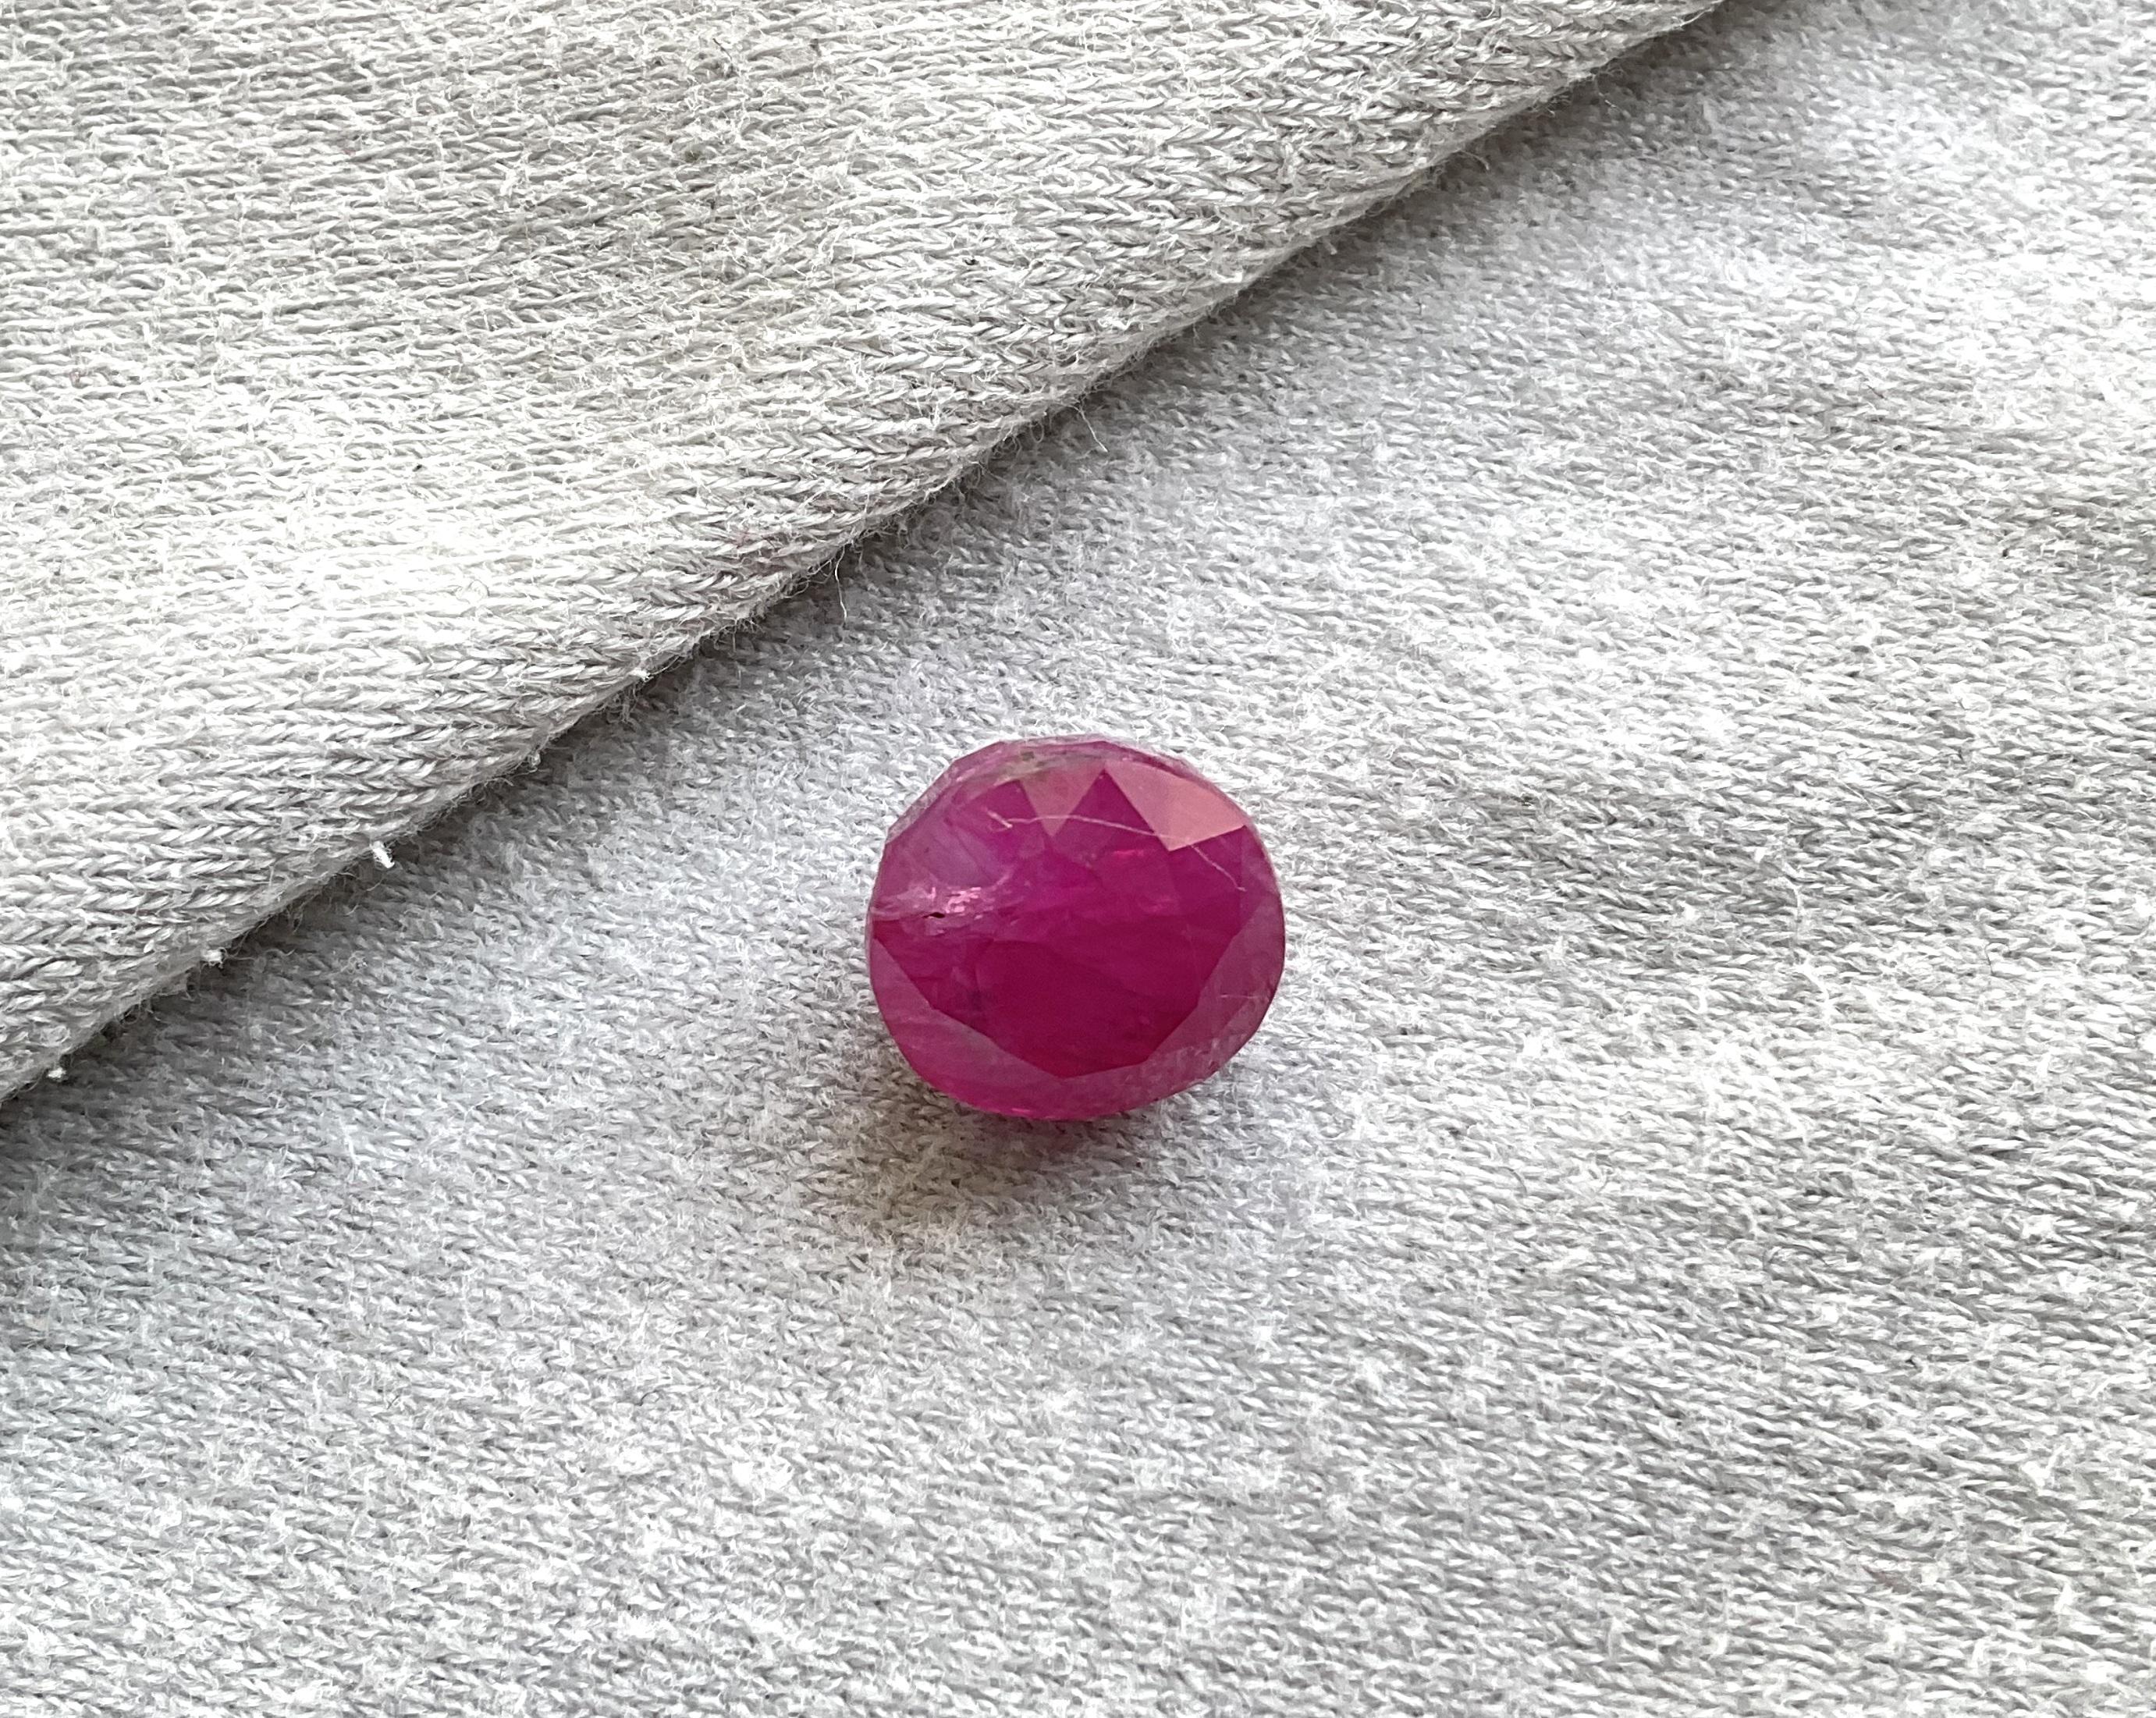 Rare Burmese Myanmar ruby no heat no treatment
Weight: 9.58 Carats
Size: 11X9 MM
Pieces: 1
Shape: Faceted Round Cut stone